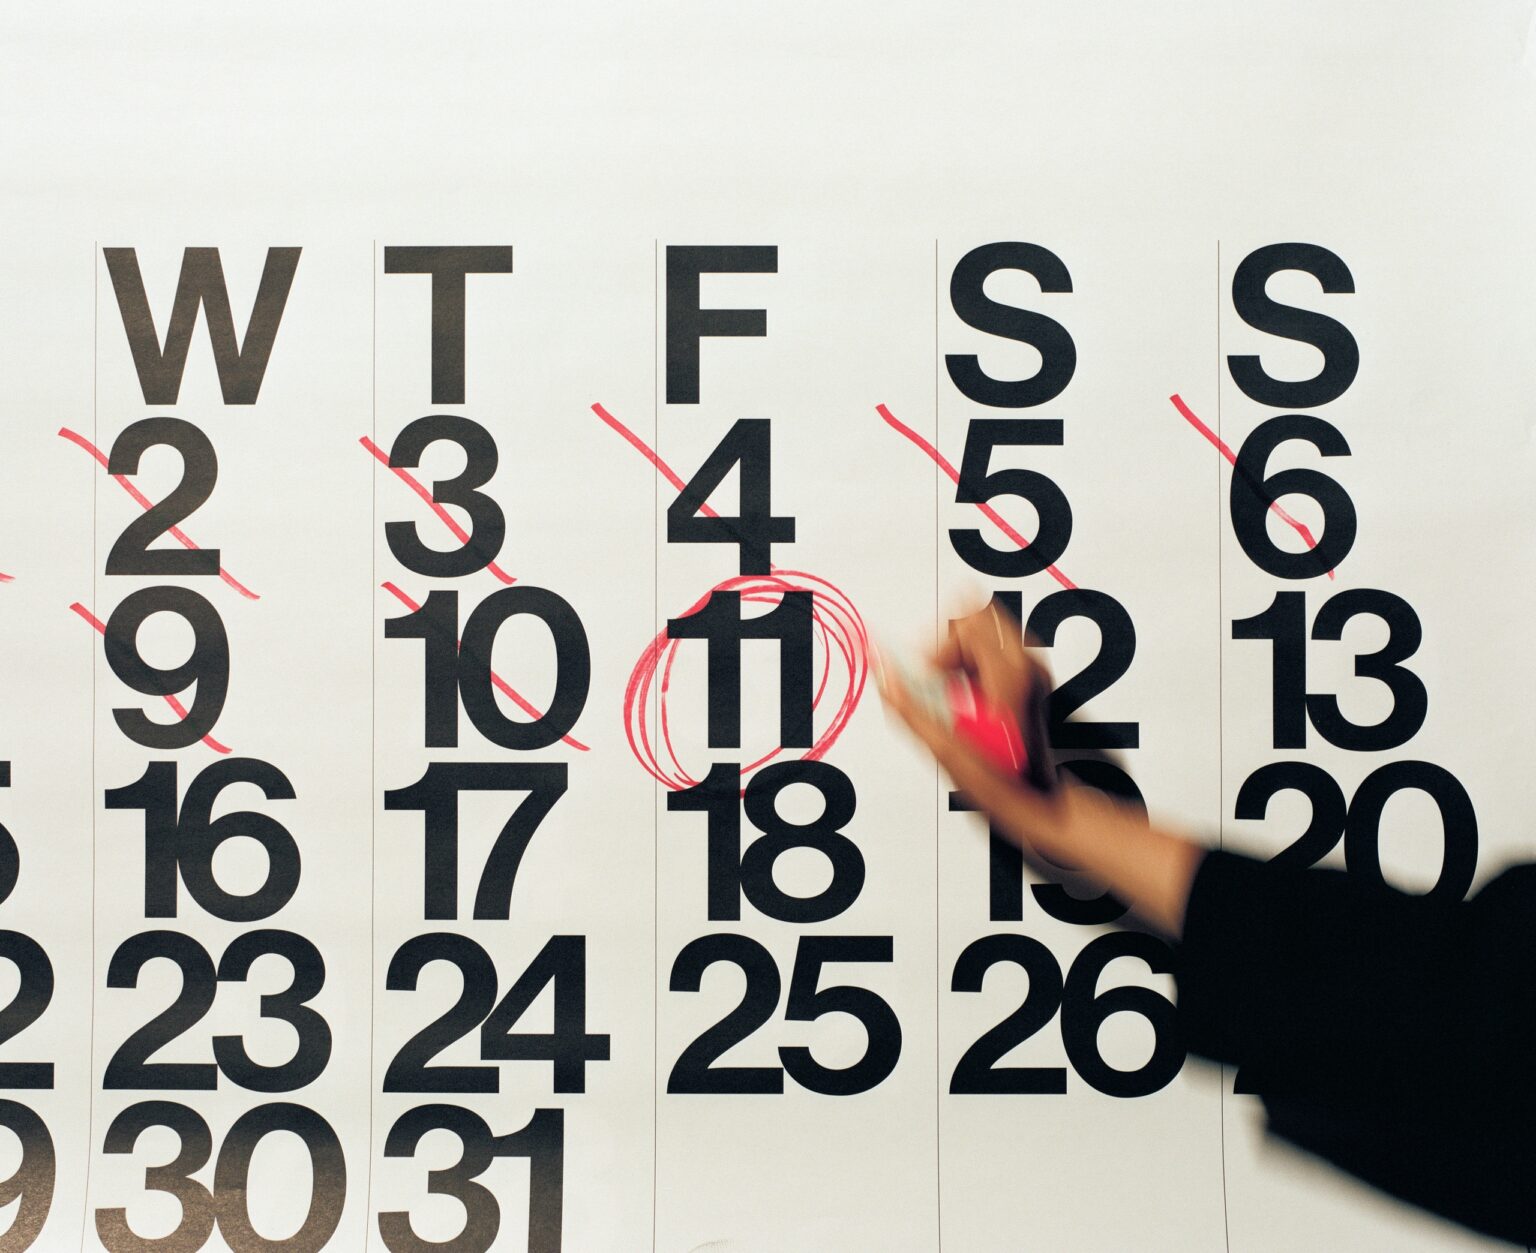 Hand circling numbers on calendar in red pen